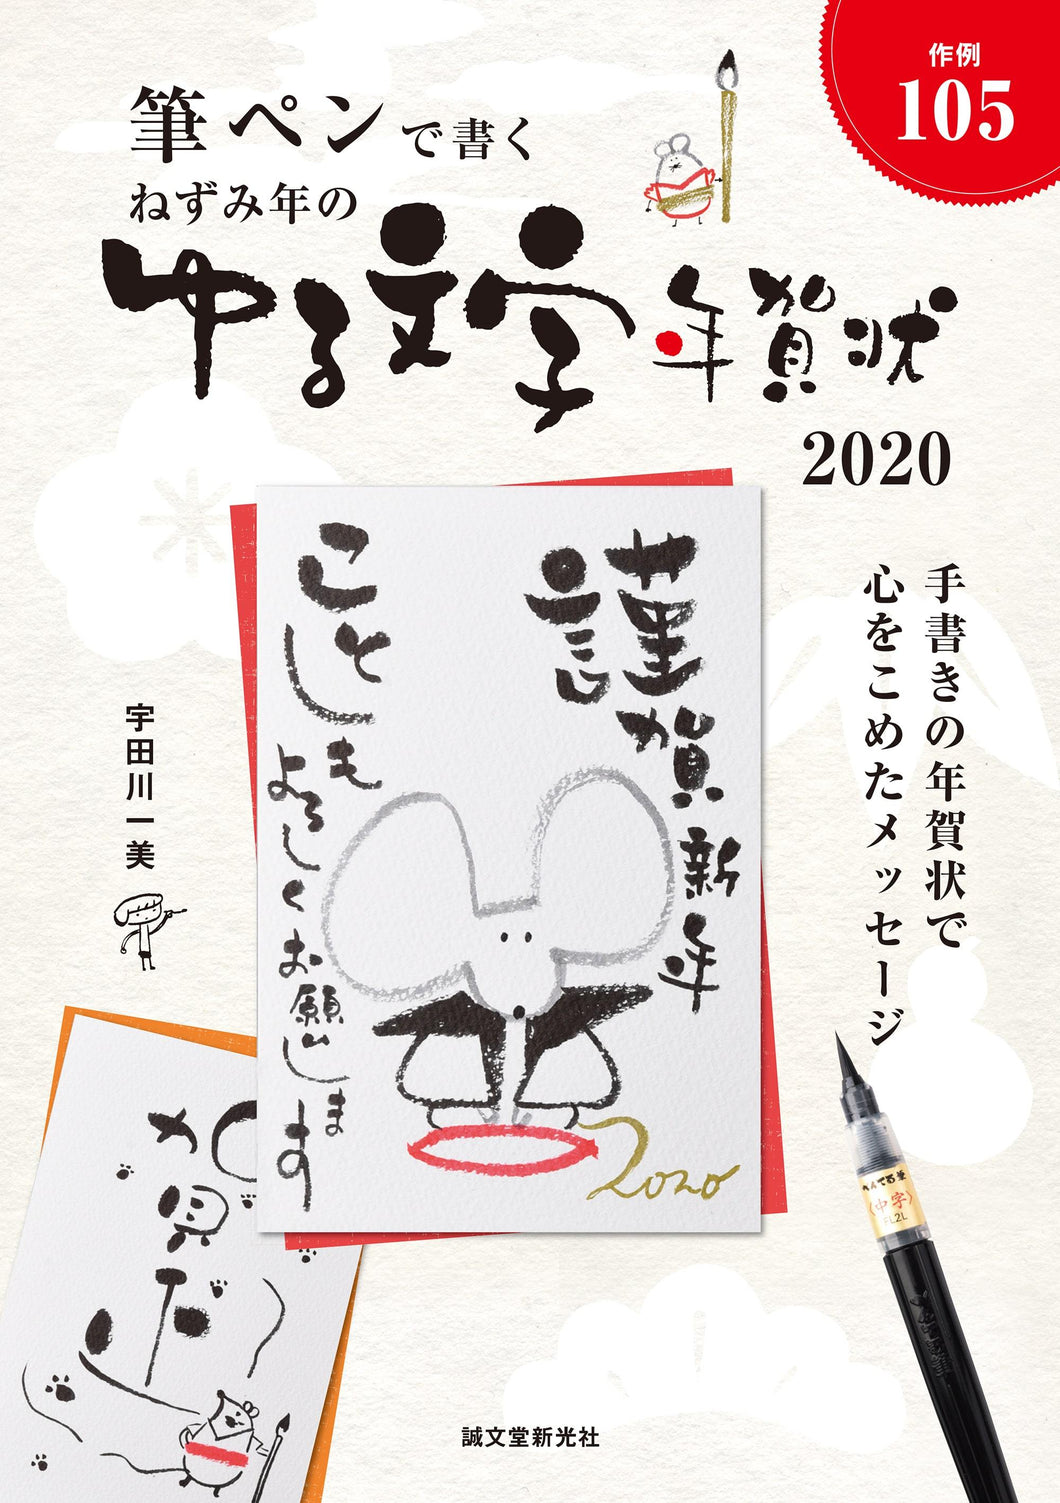 New Year's card with loose characters in the year of the mouse